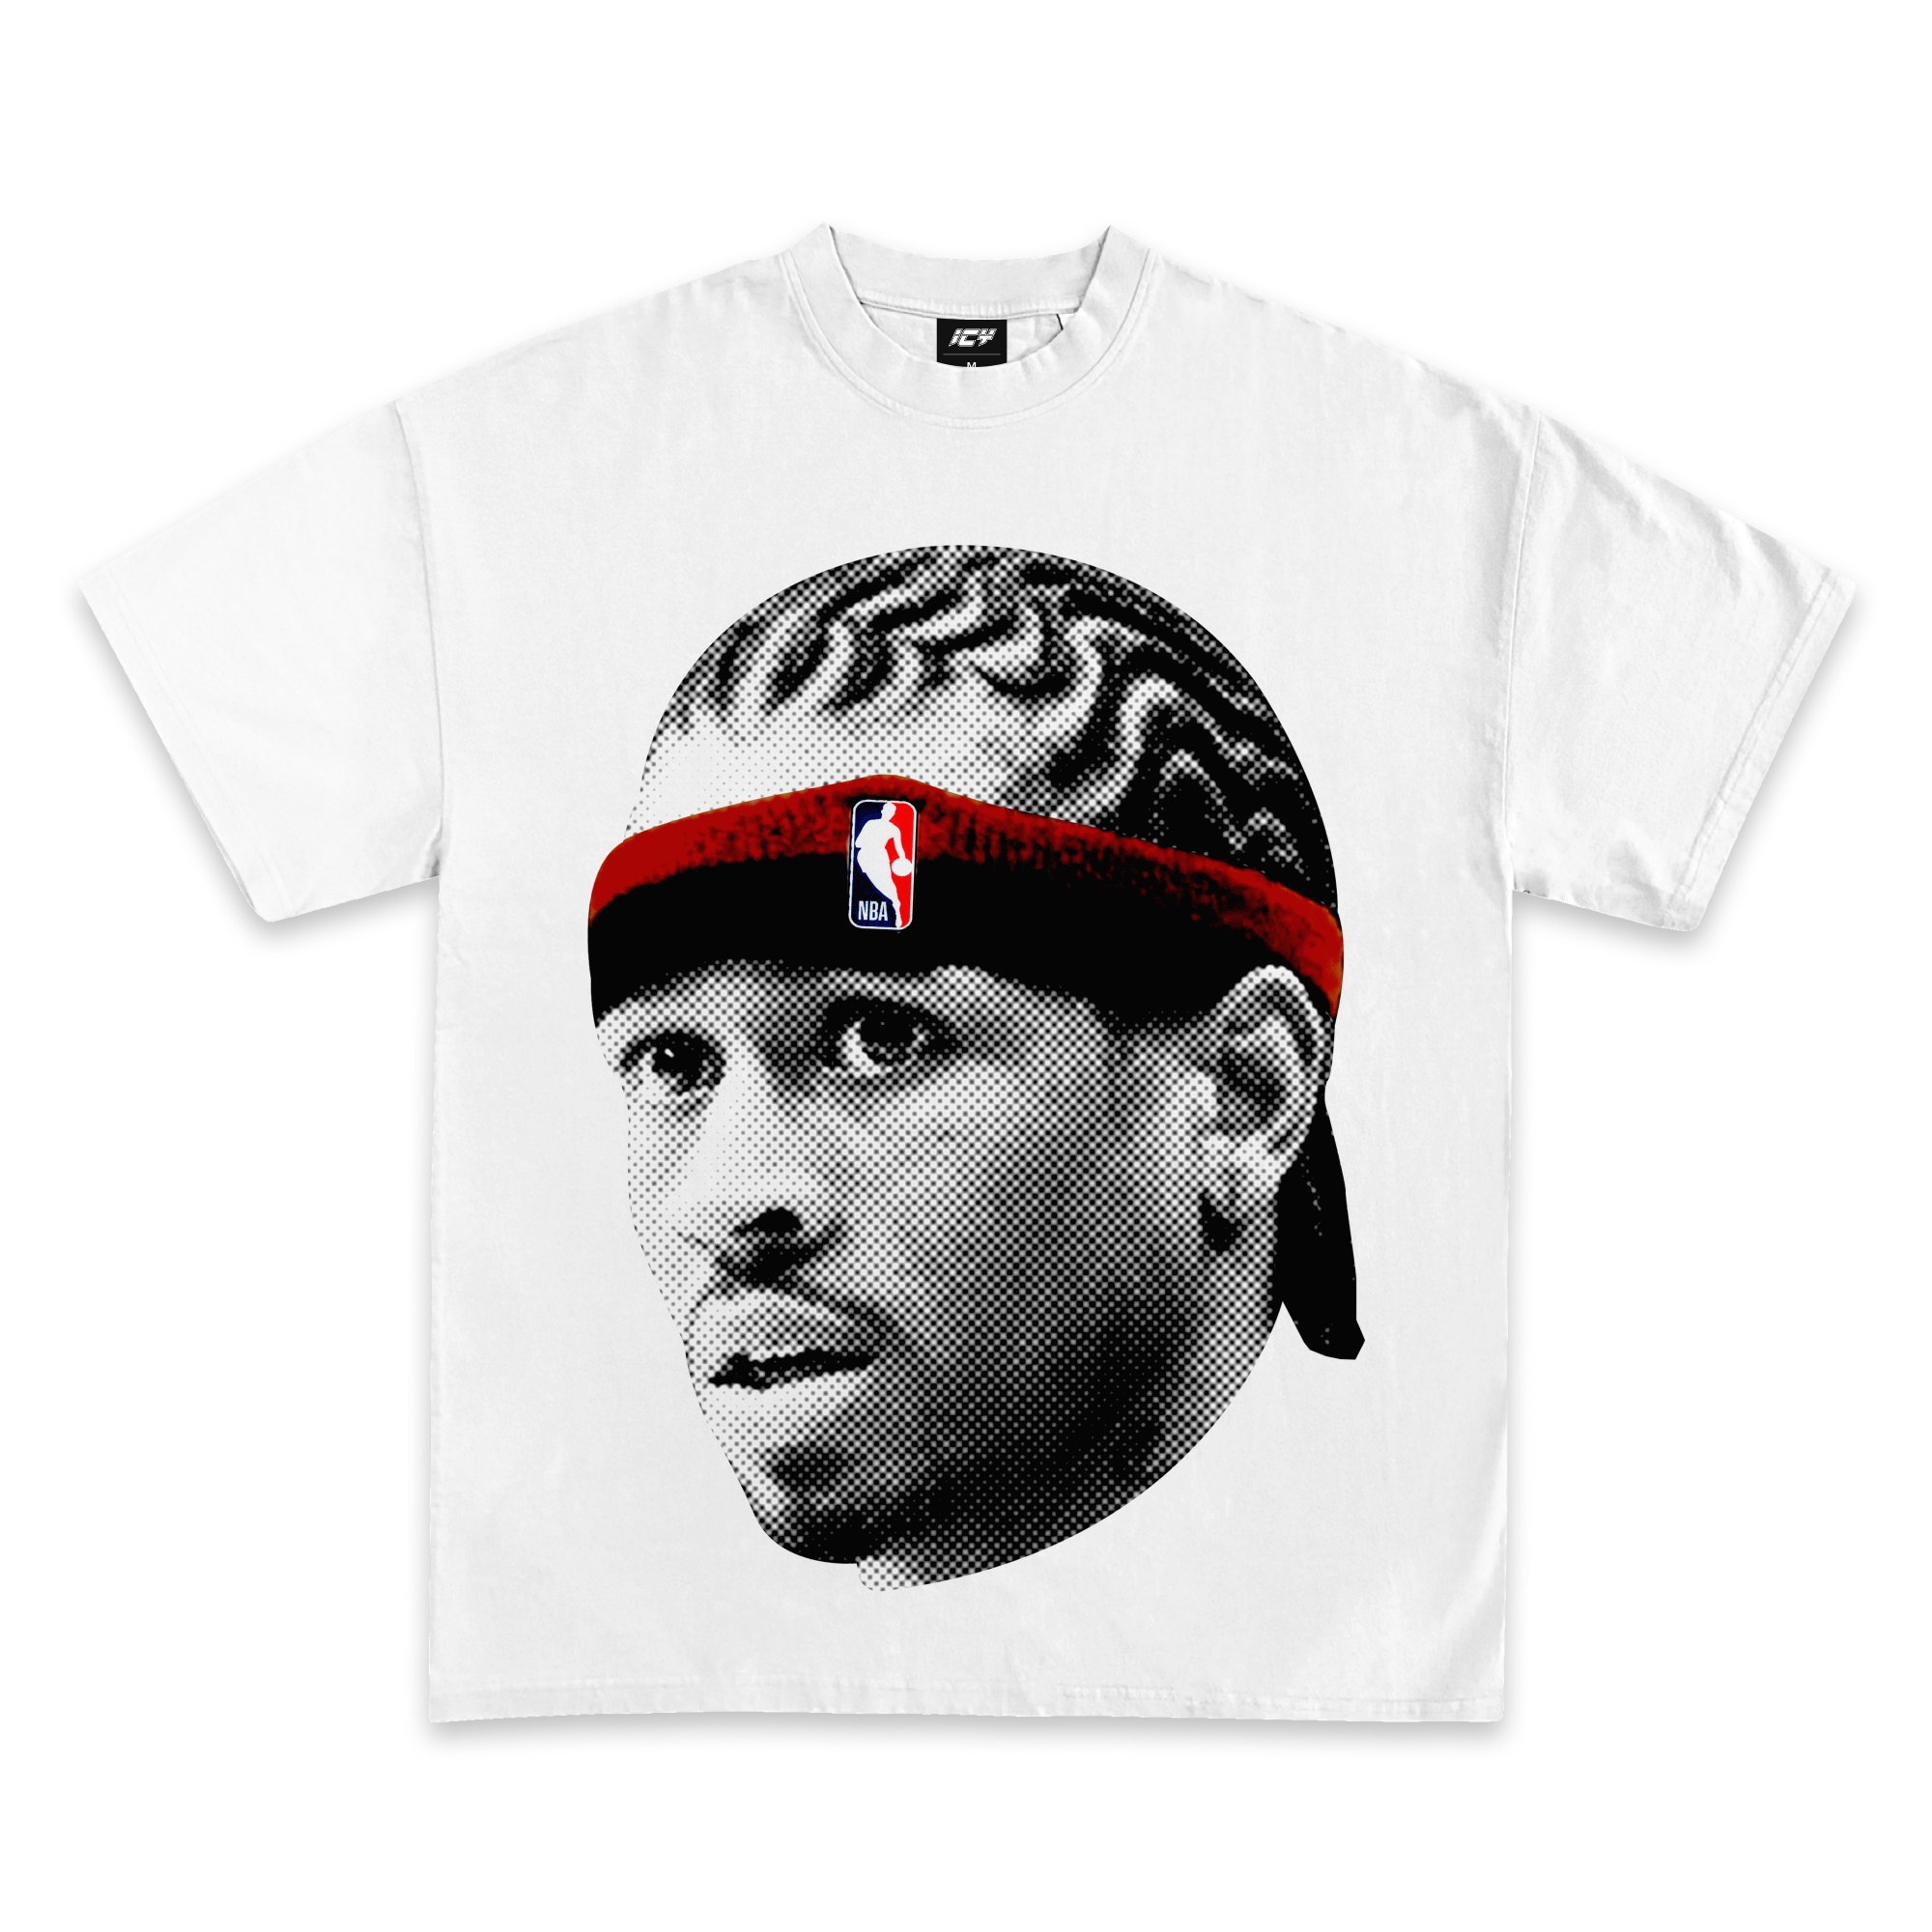 Allen Iverson Icy Exclusive Graphic T-Shirt